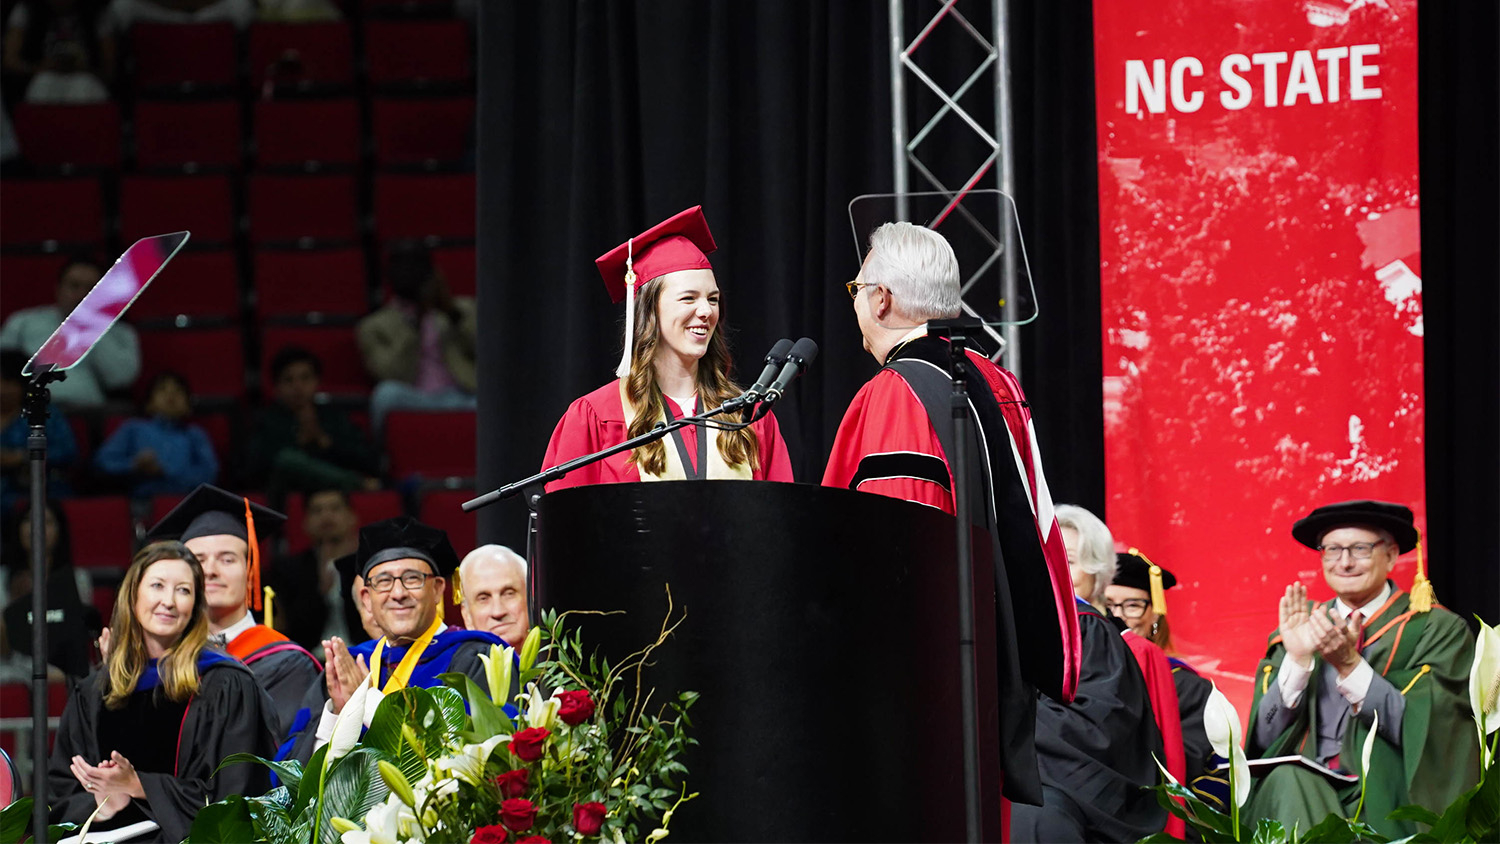 O'Connor shakes the Chancellor's hand as she climbs the stage to give the student address for the May 2023 NC State University Commencement Ceremony